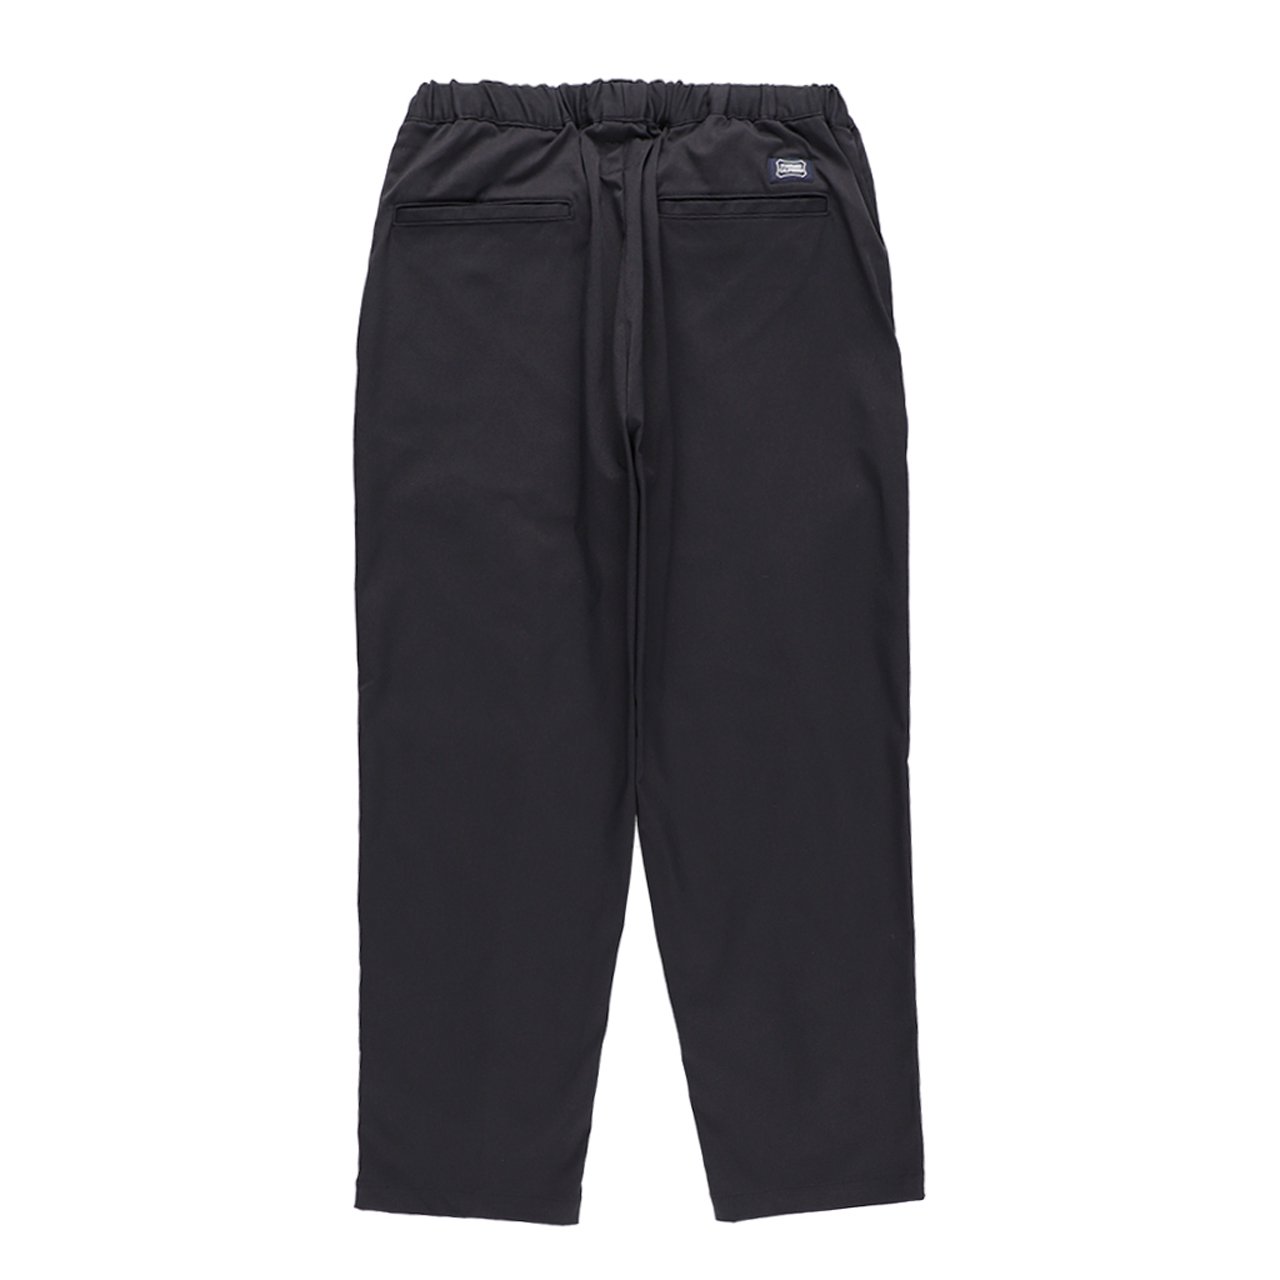 <img class='new_mark_img1' src='https://img.shop-pro.jp/img/new/icons5.gif' style='border:none;display:inline;margin:0px;padding:0px;width:auto;' />STANDARD CALIFORNIA ( ե˥)Easy Work Pants Black